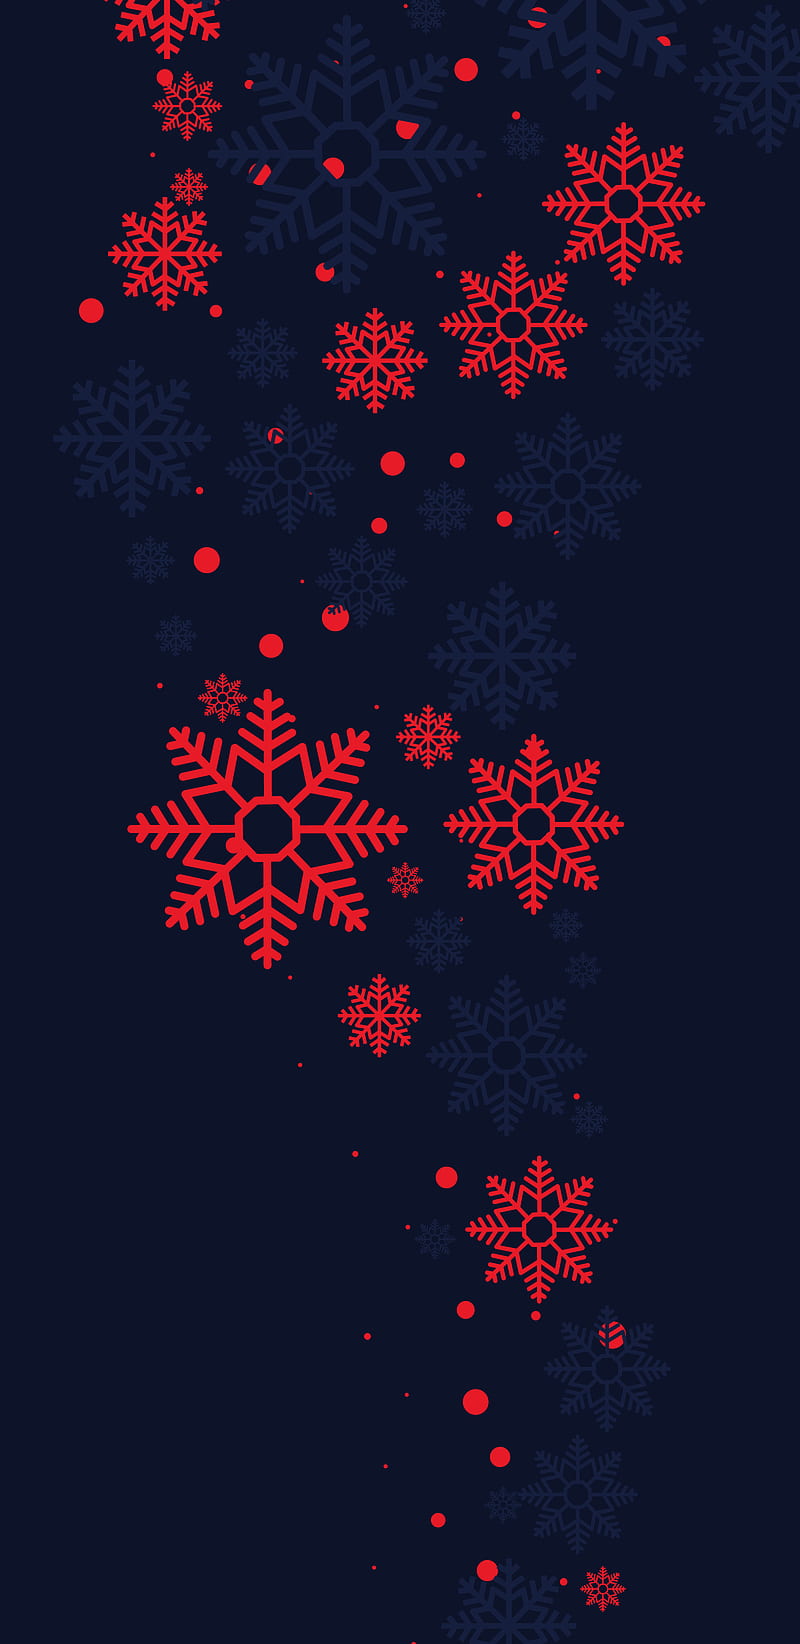 Snowflake Background Photos Download The BEST Free Snowflake Background  Stock Photos  HD Images